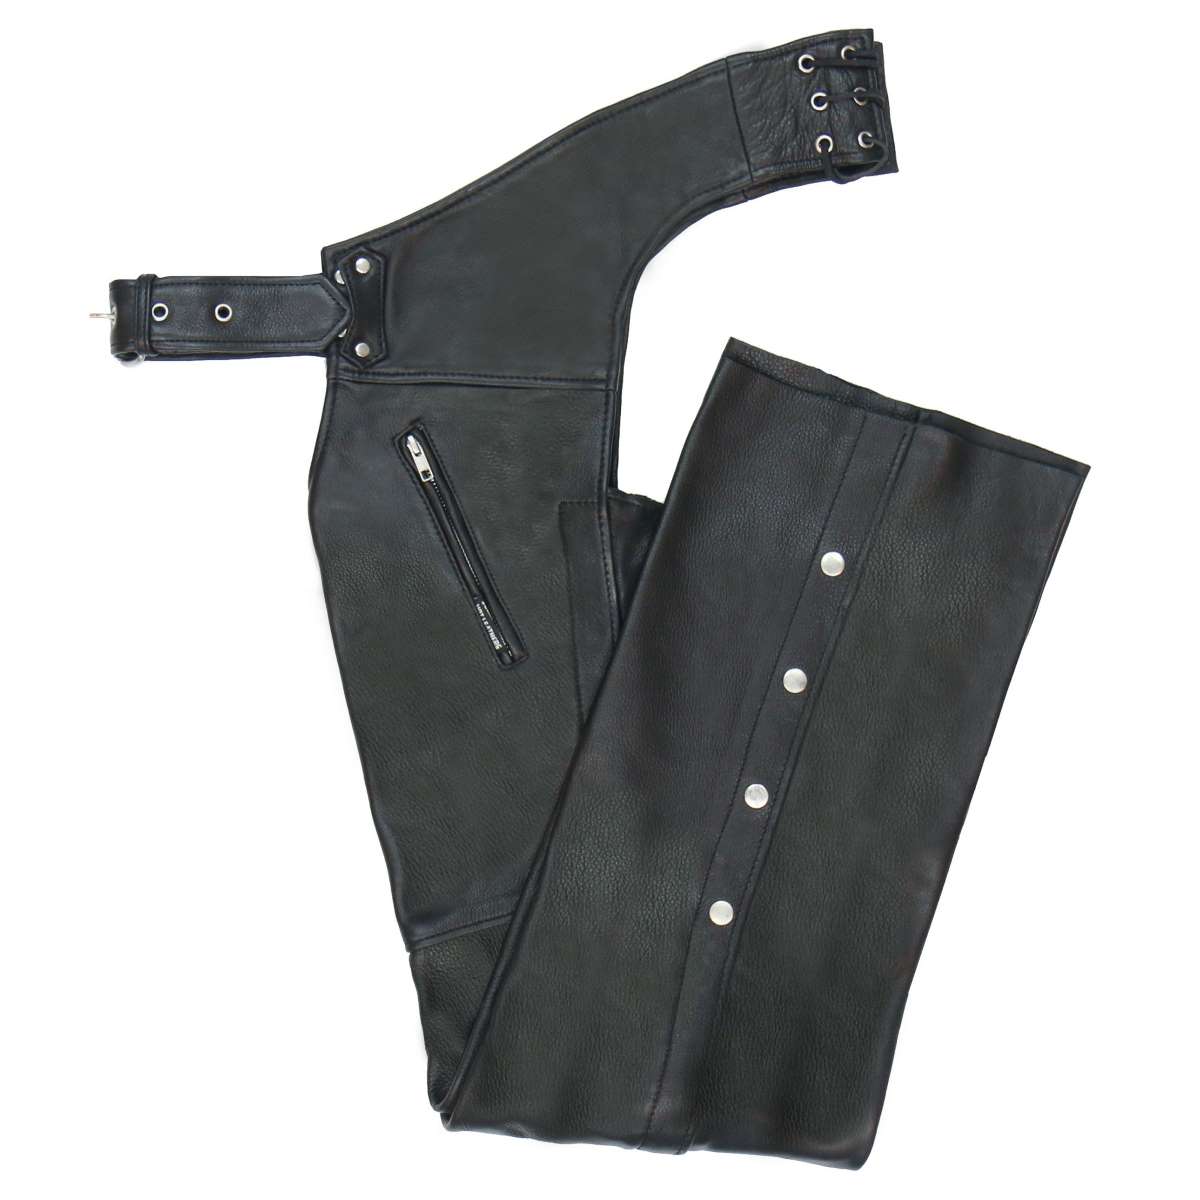 Hot Leathers CHM1009 Men's Black Leather 2 Pocket Mesh Lined Motorcycle Rider Chaps